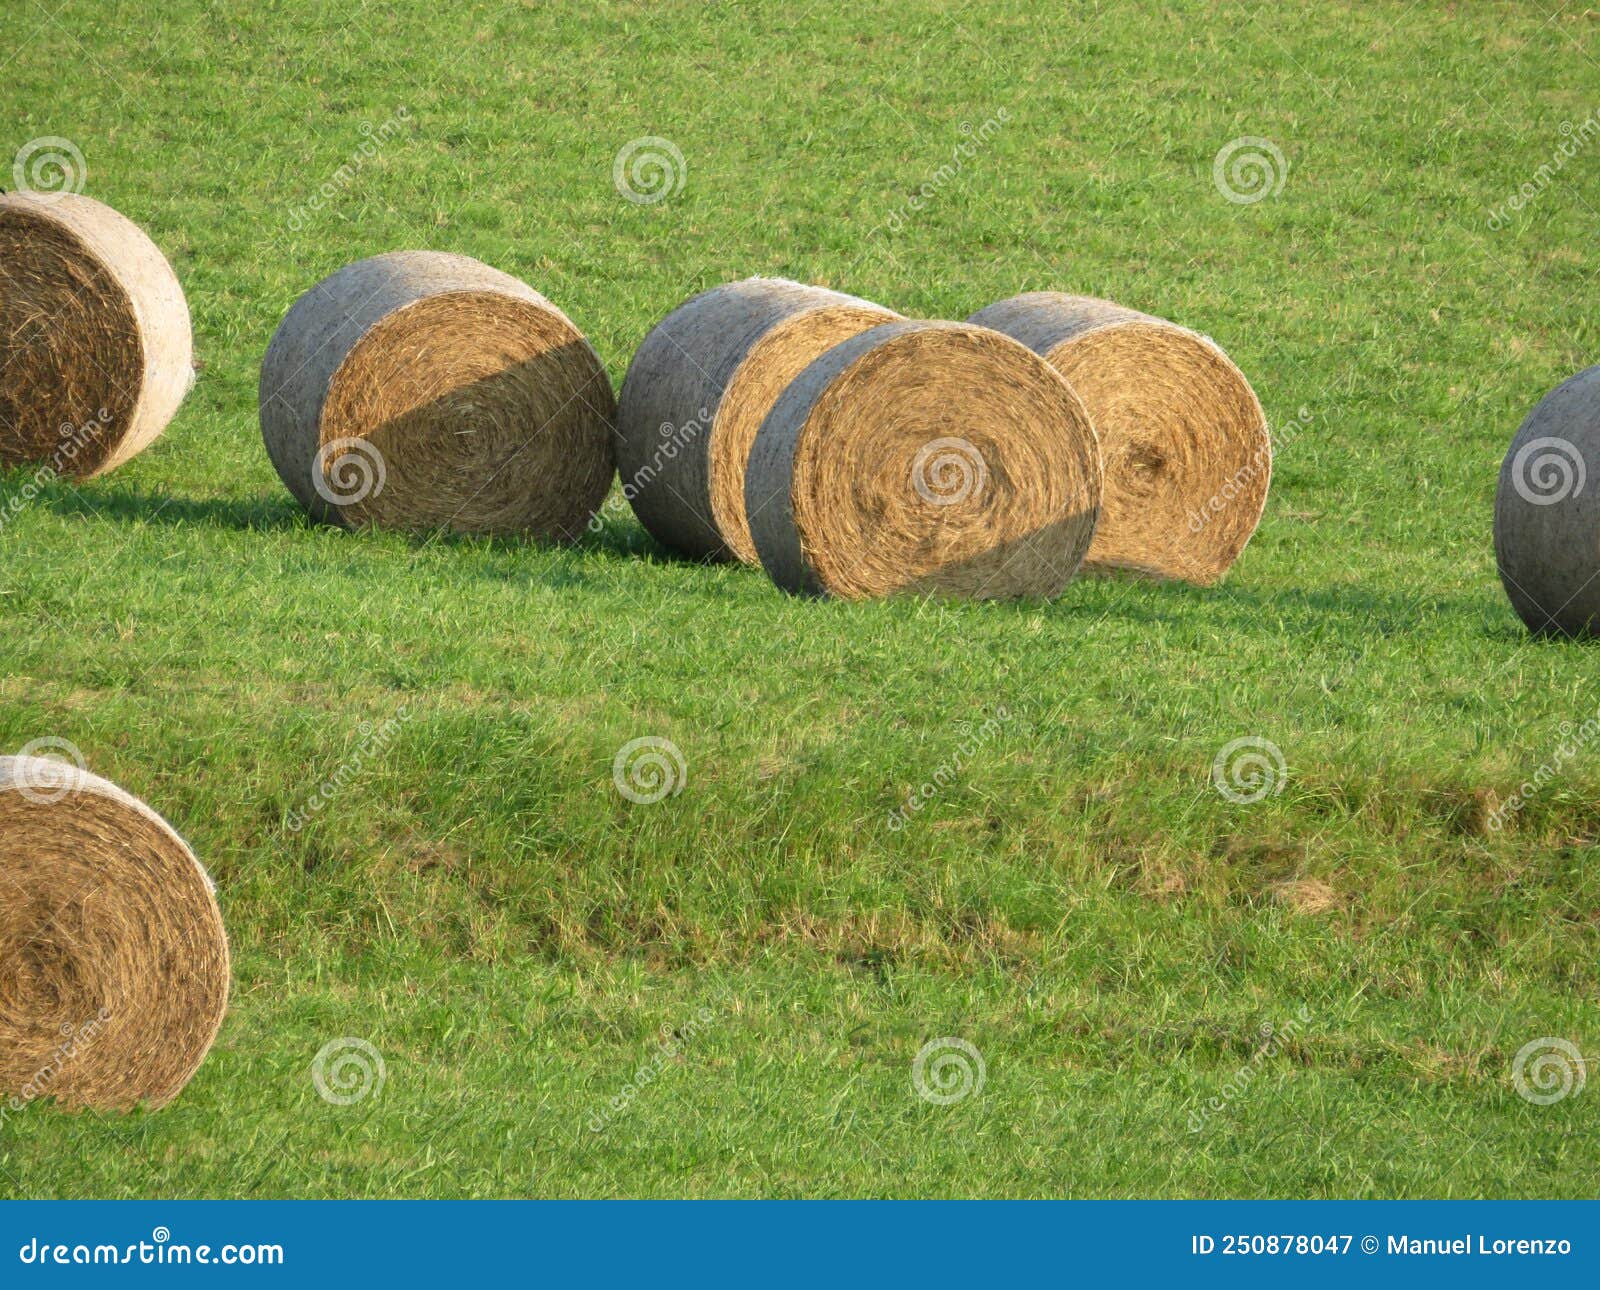 large piles of straw animal feed collection field